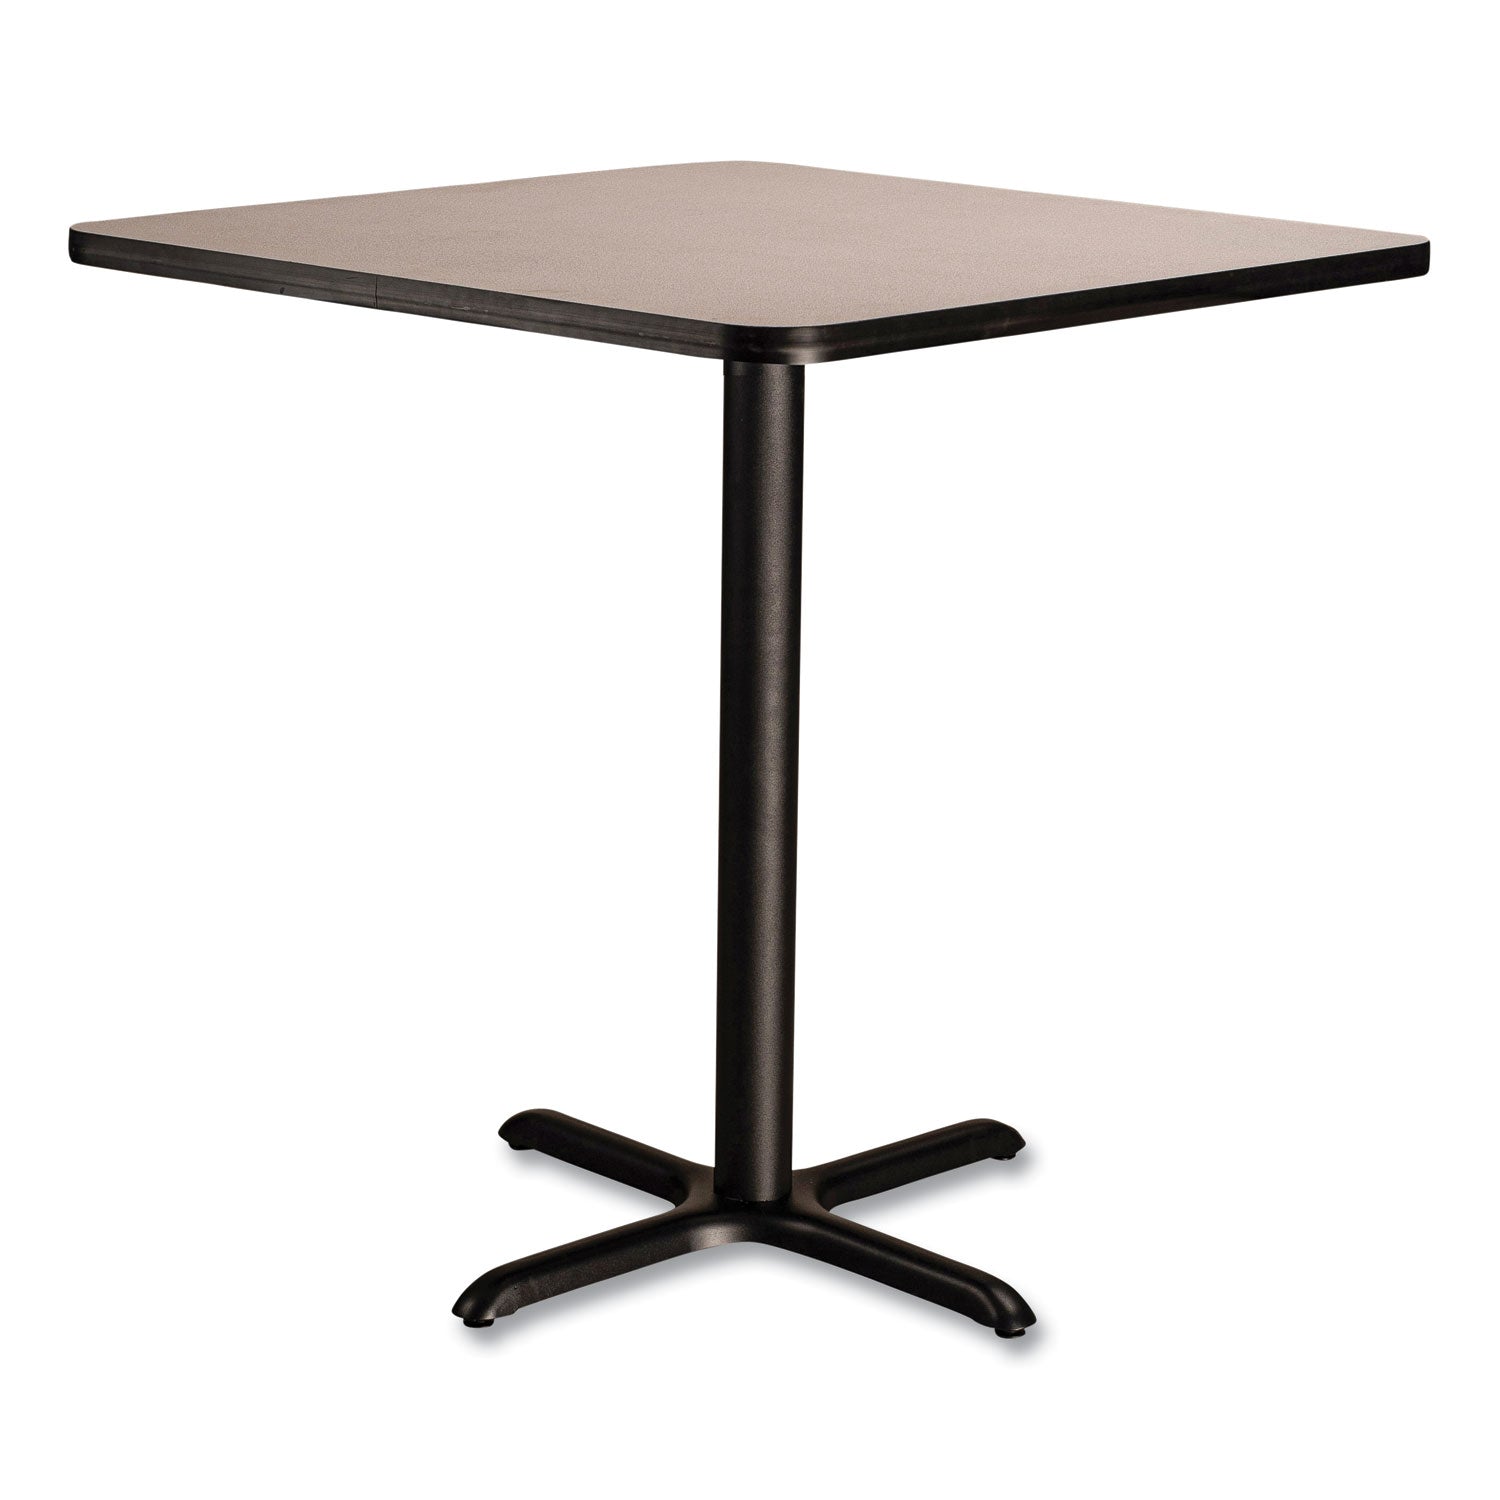 cafe-table-36w-x-36d-x-36h-square-top-x-base-gray-nebula-top-black-base-ships-in-7-10-business-days_npsct33636xc1gy - 3